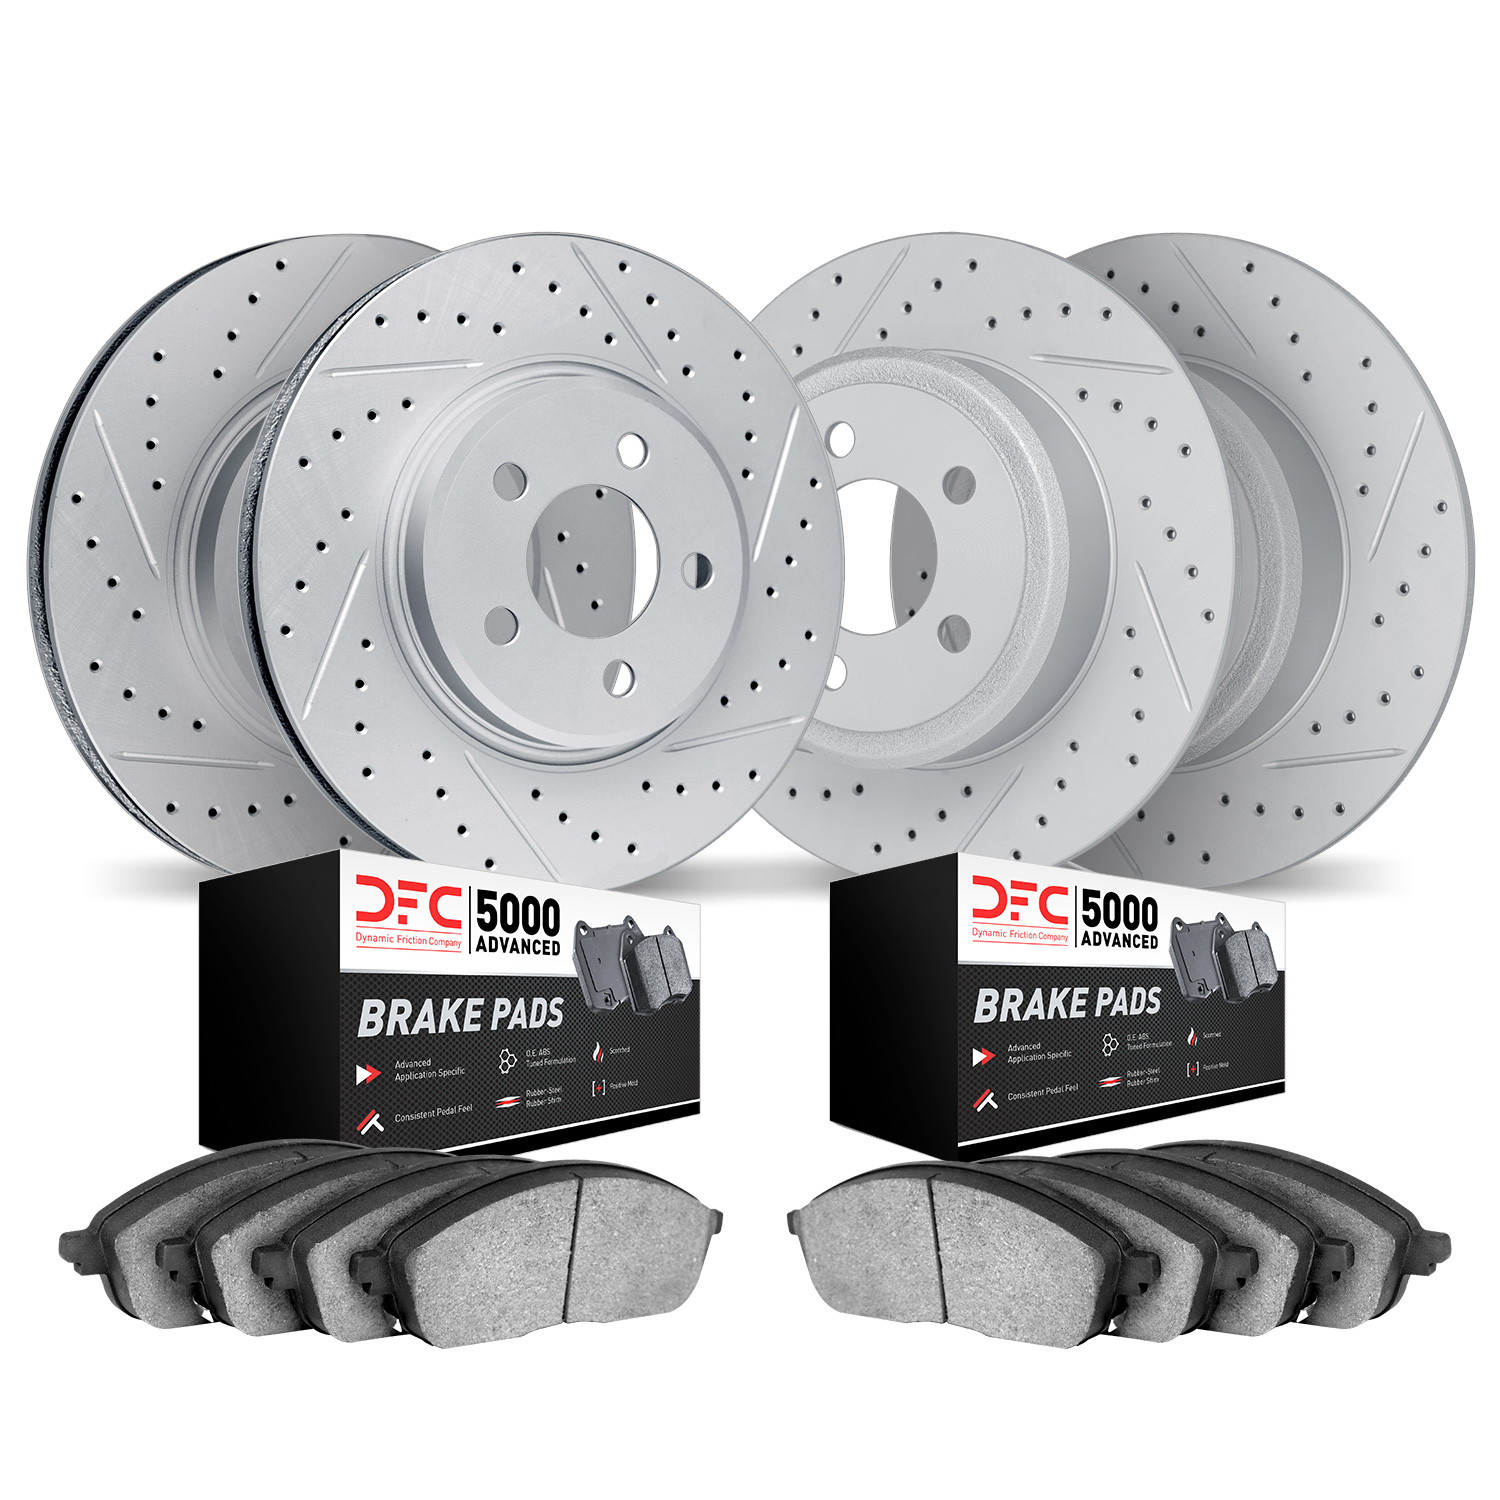 2504-59070 Geoperformance Drilled/Slotted Rotors w/5000 Advanced Brake Pads Kit, 2006-2014 Acura/Honda, Position: Front and Rear